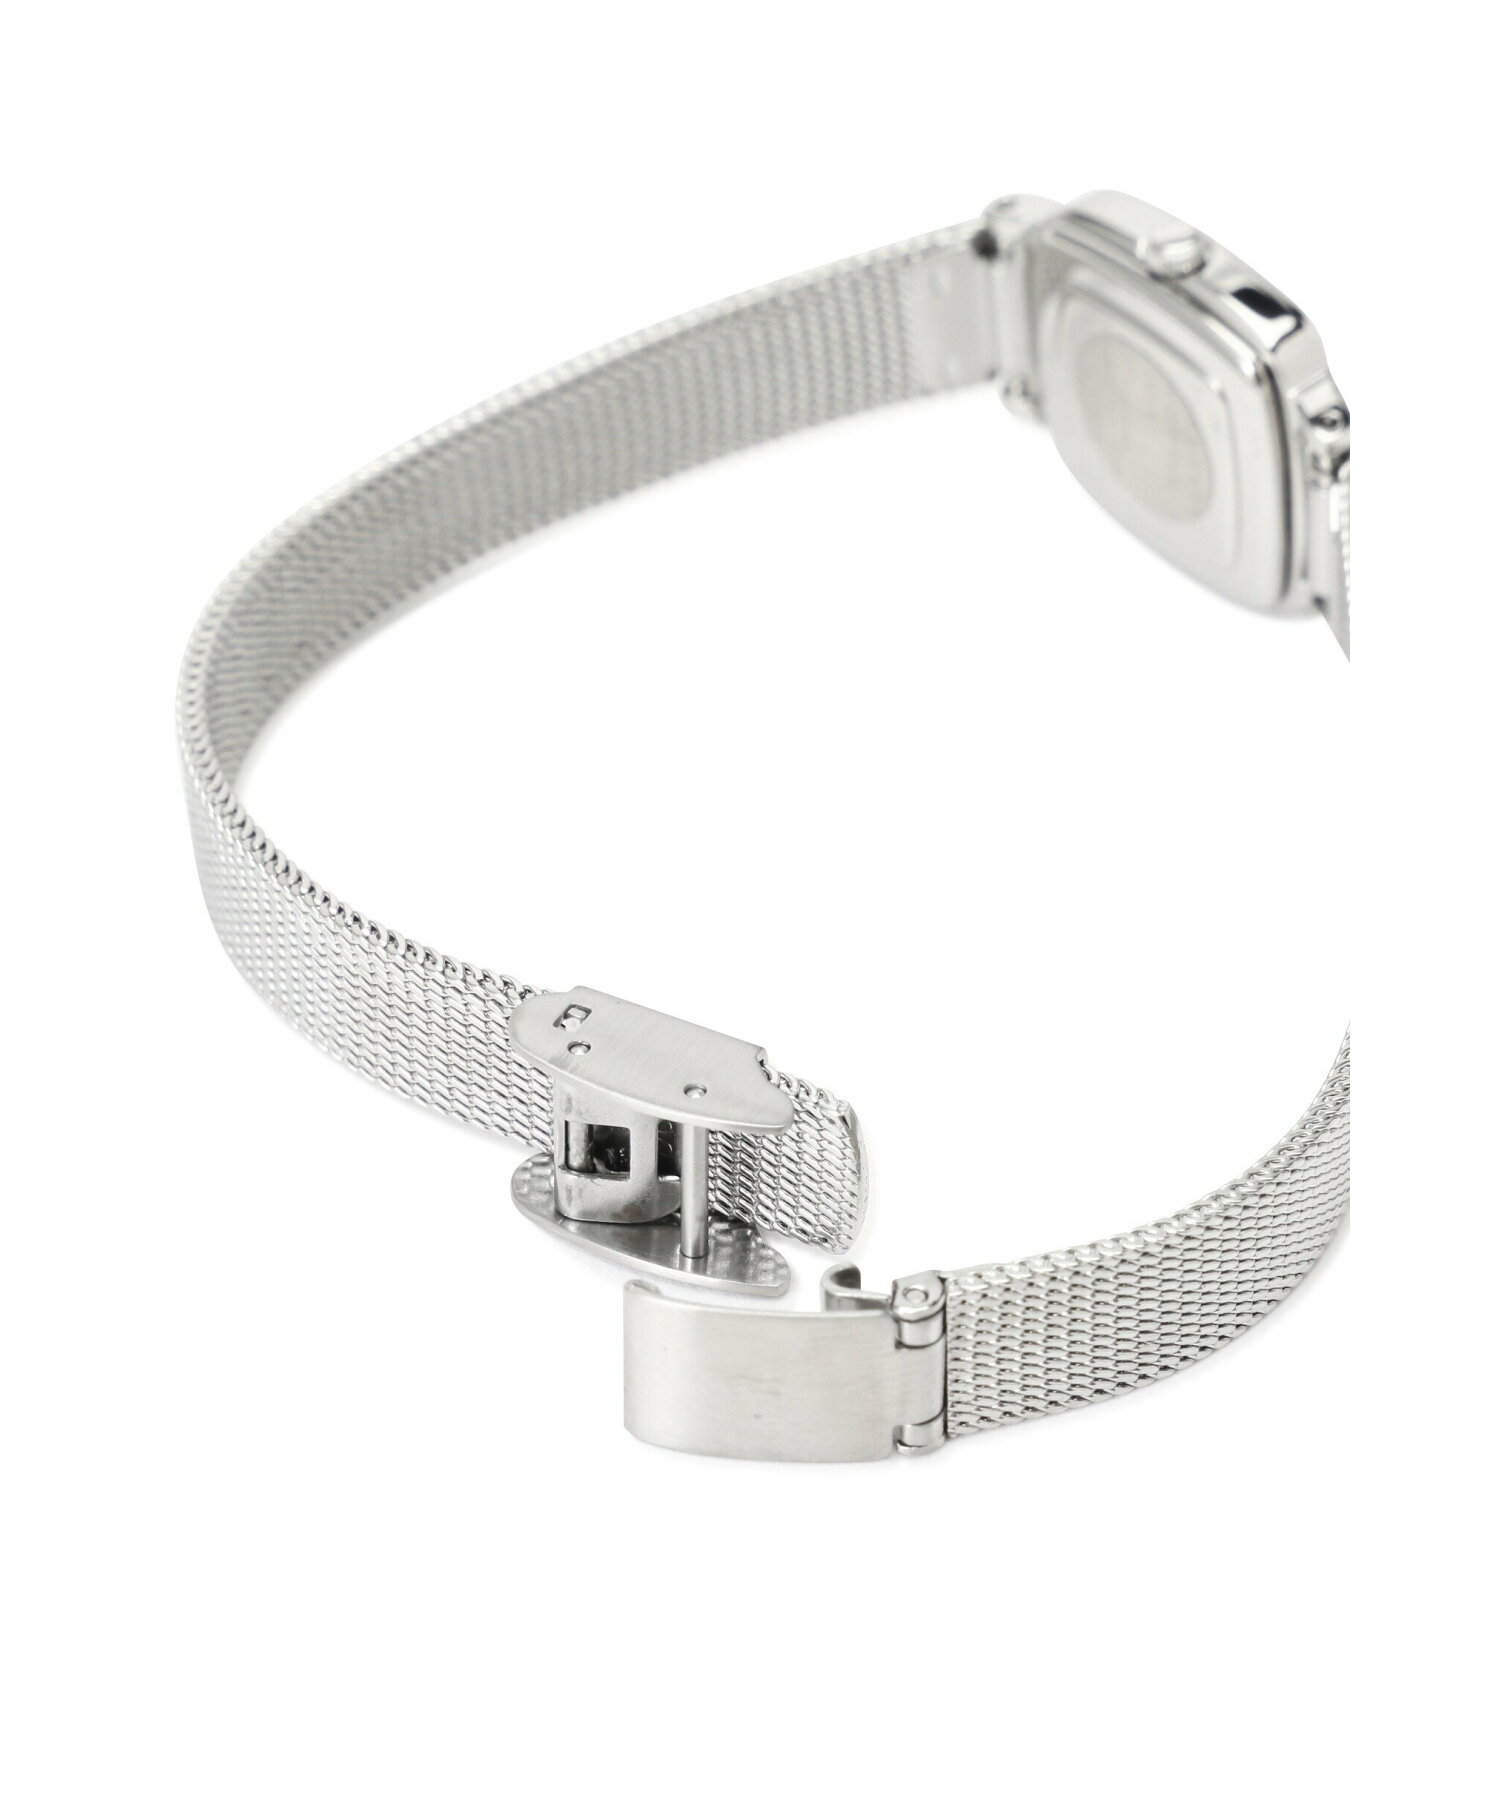 MESH BAND SQUARE WATCH